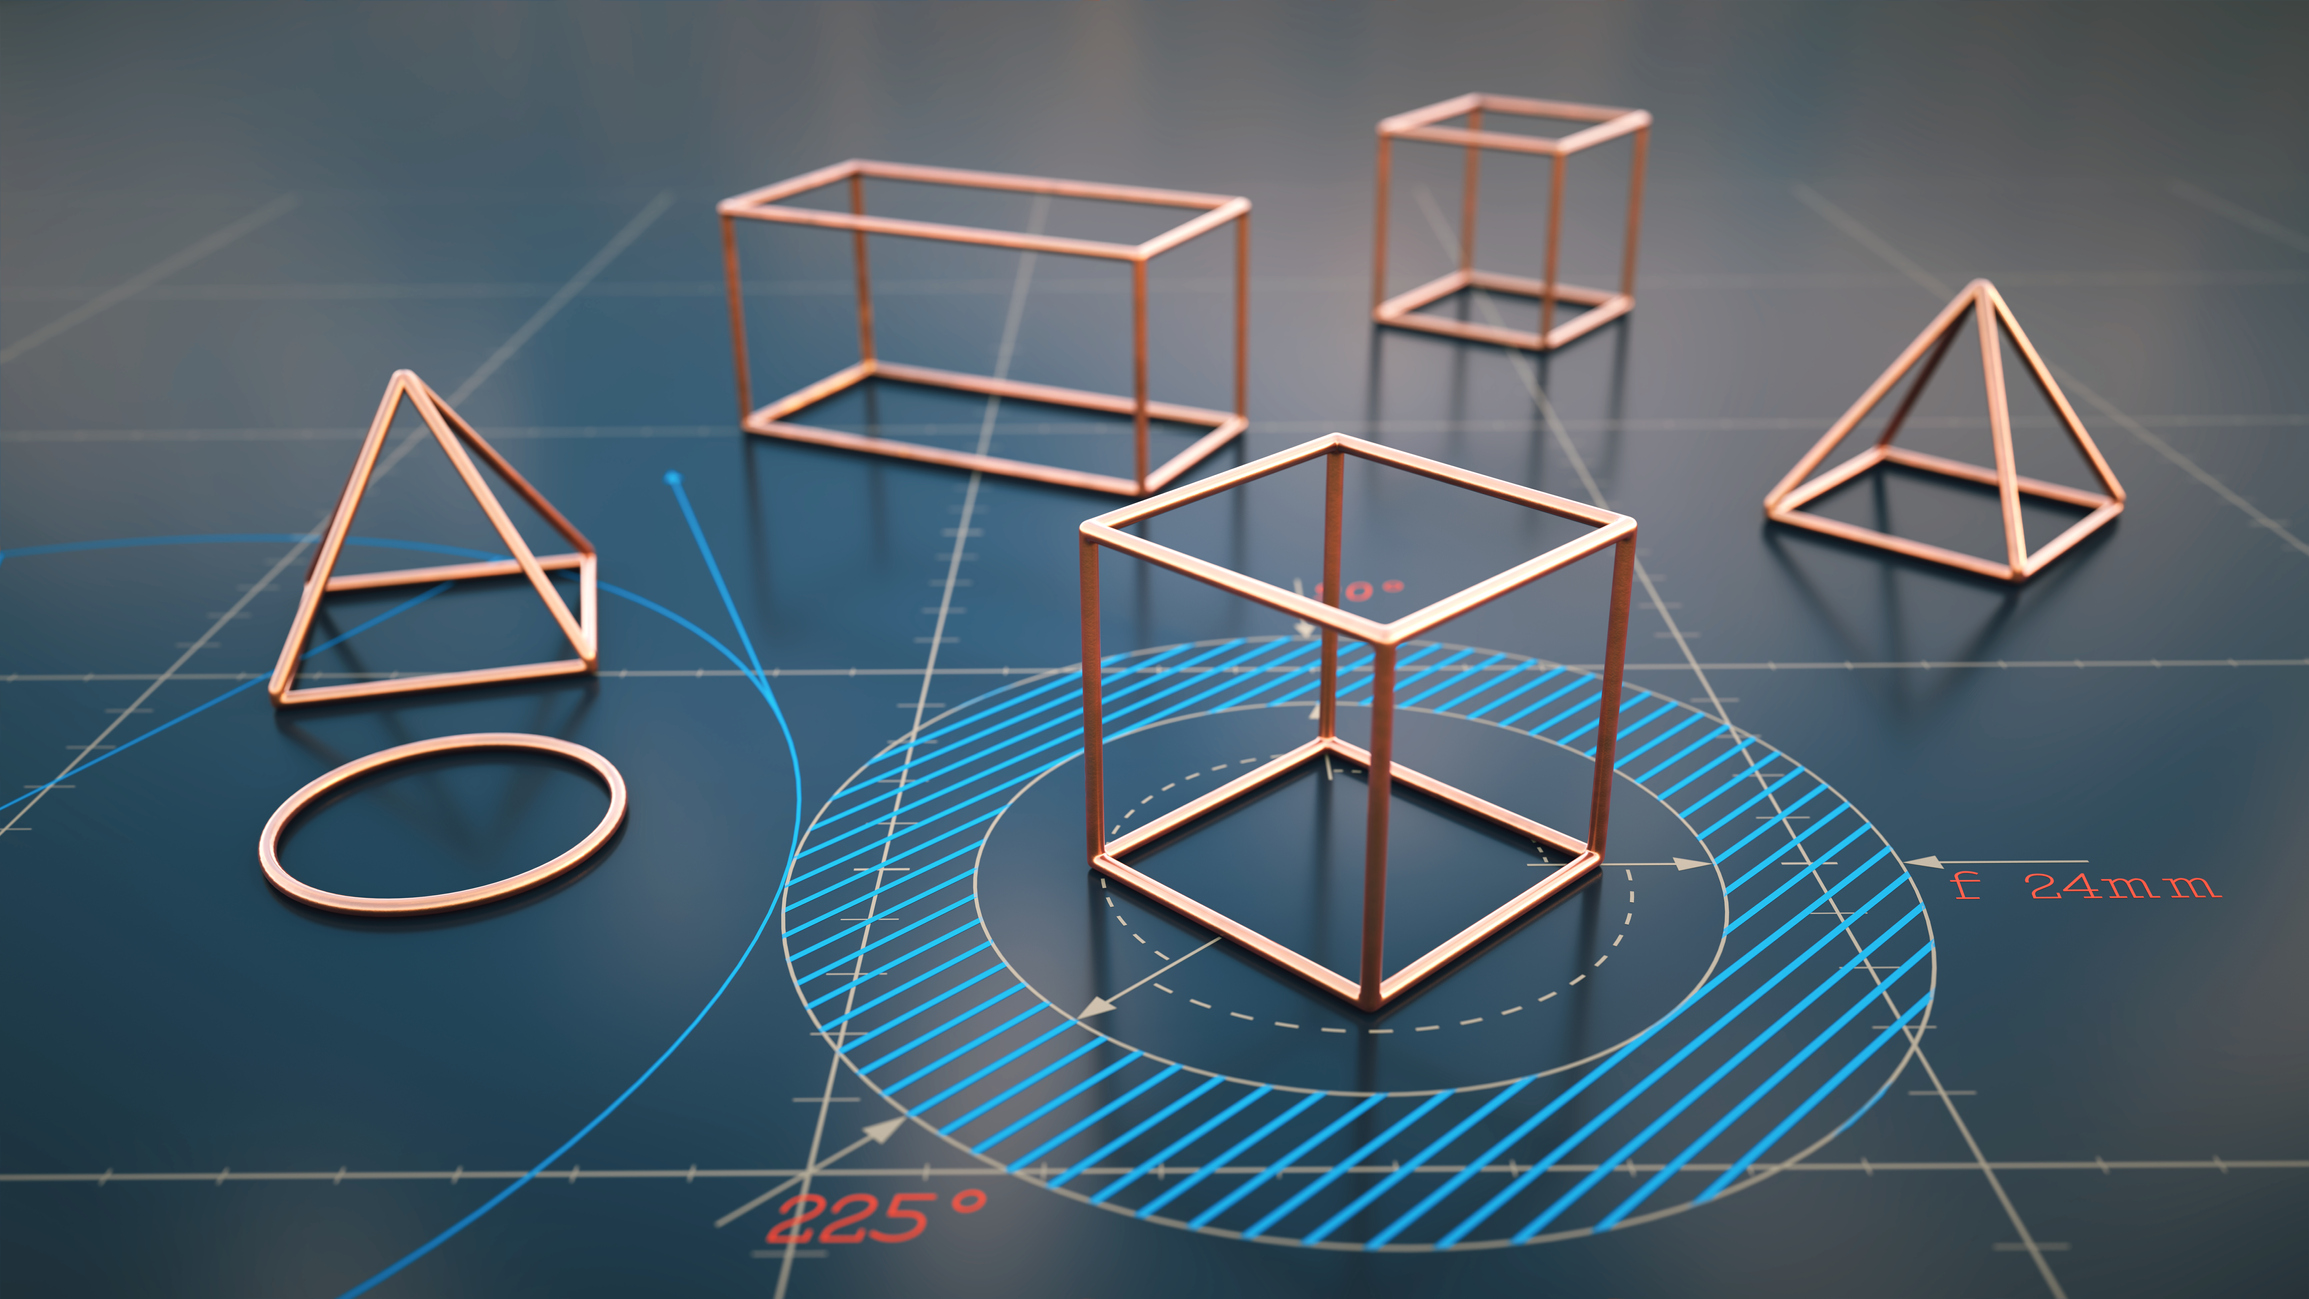 Various geometric shape models laying on a shiny surface with coordinate blueprints, low-angle close-up composition